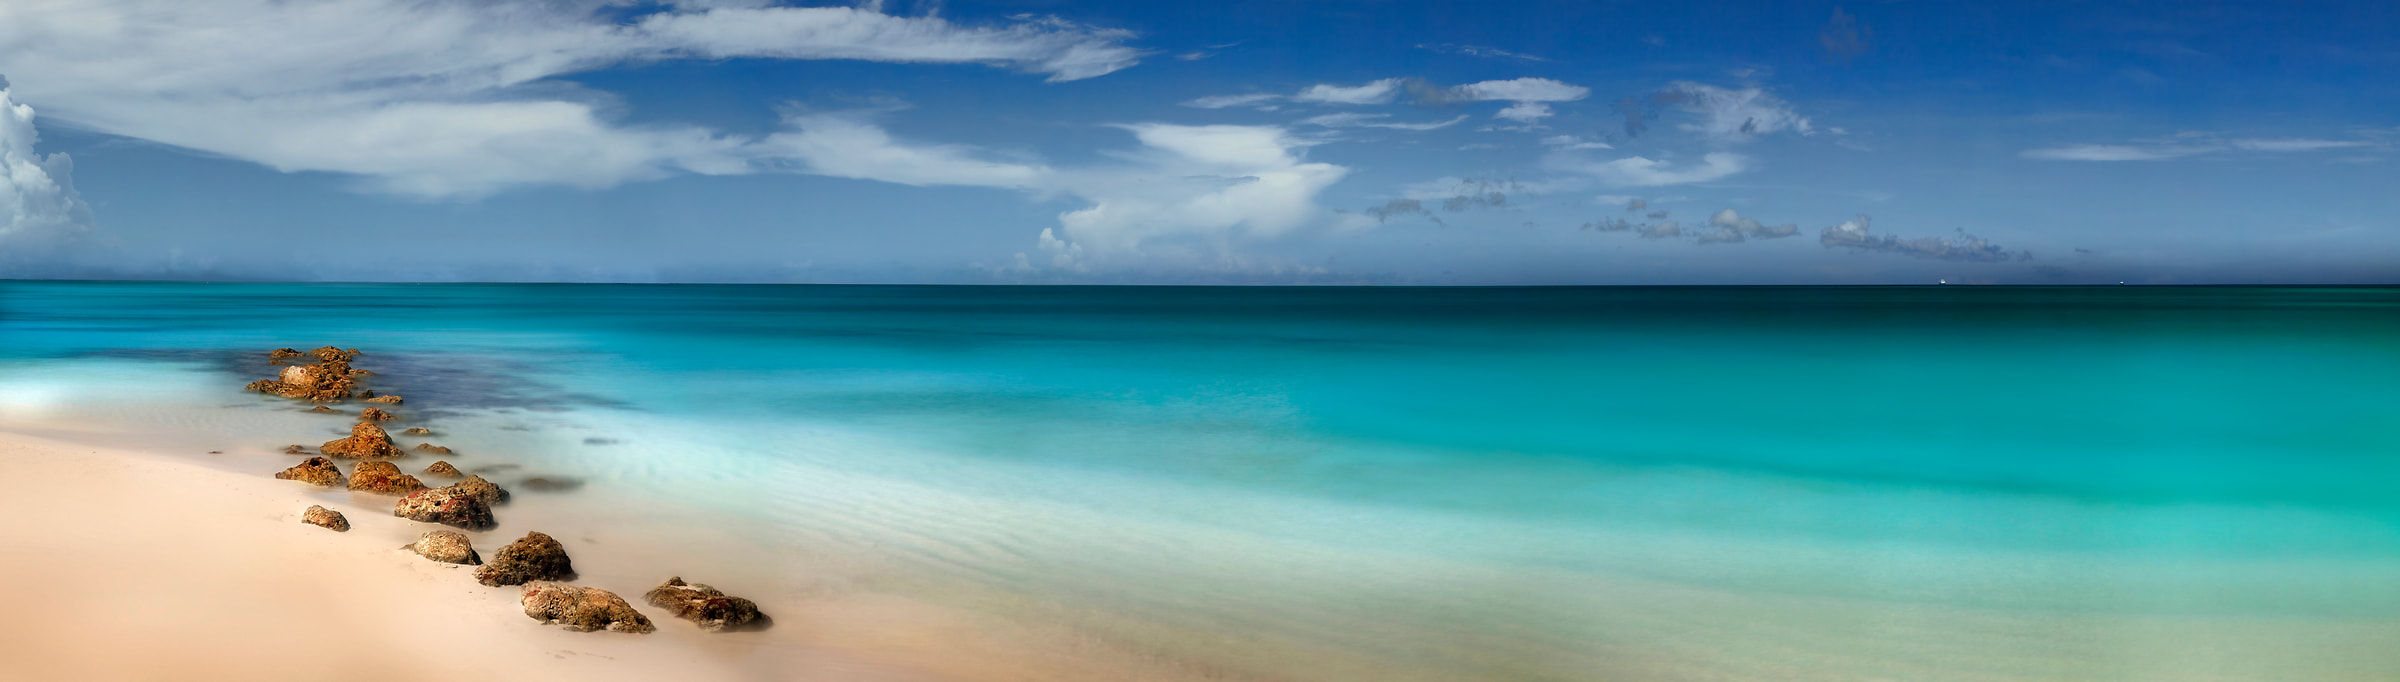 229 megapixels! A very high resolution, large-format VAST photo print of peaceful water; panorama photograph created by Phil Crawshay in Turks and Caicos Islands.